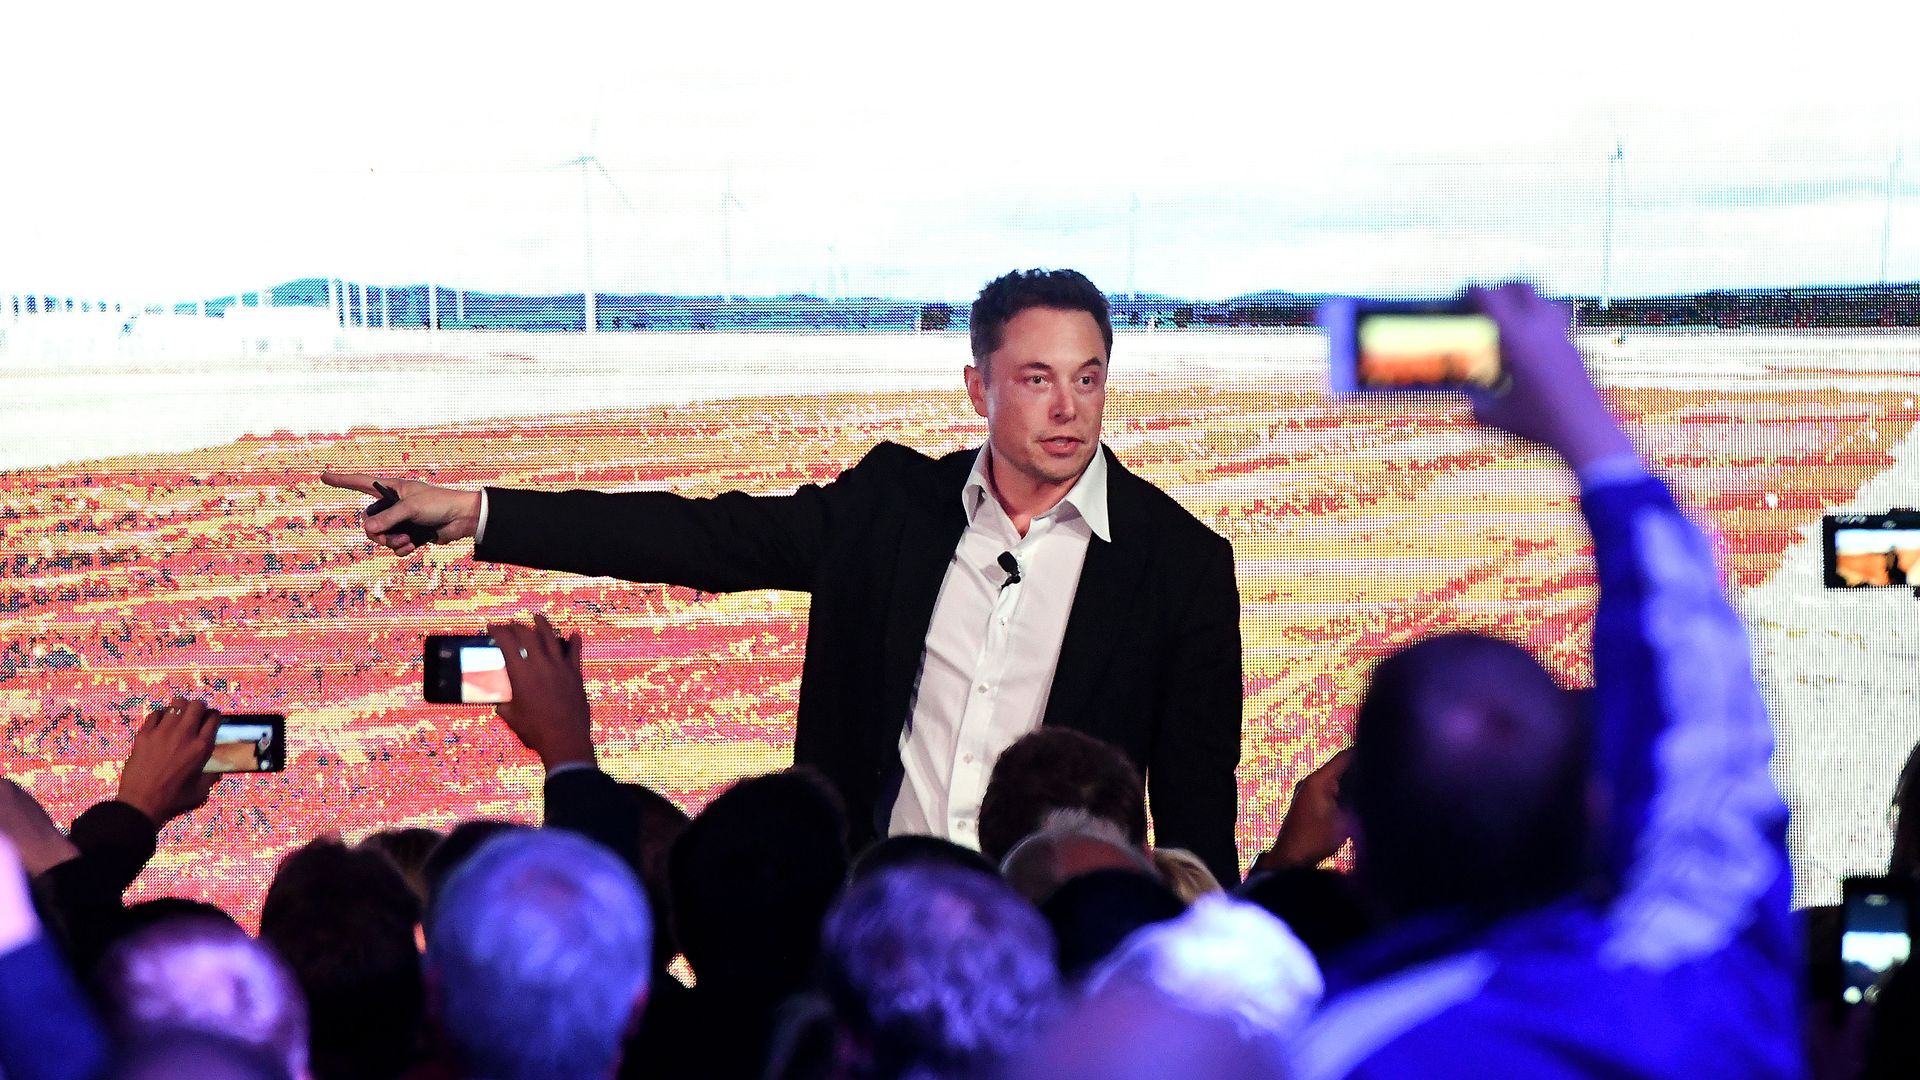 Elon Musk points to his right as people take photos